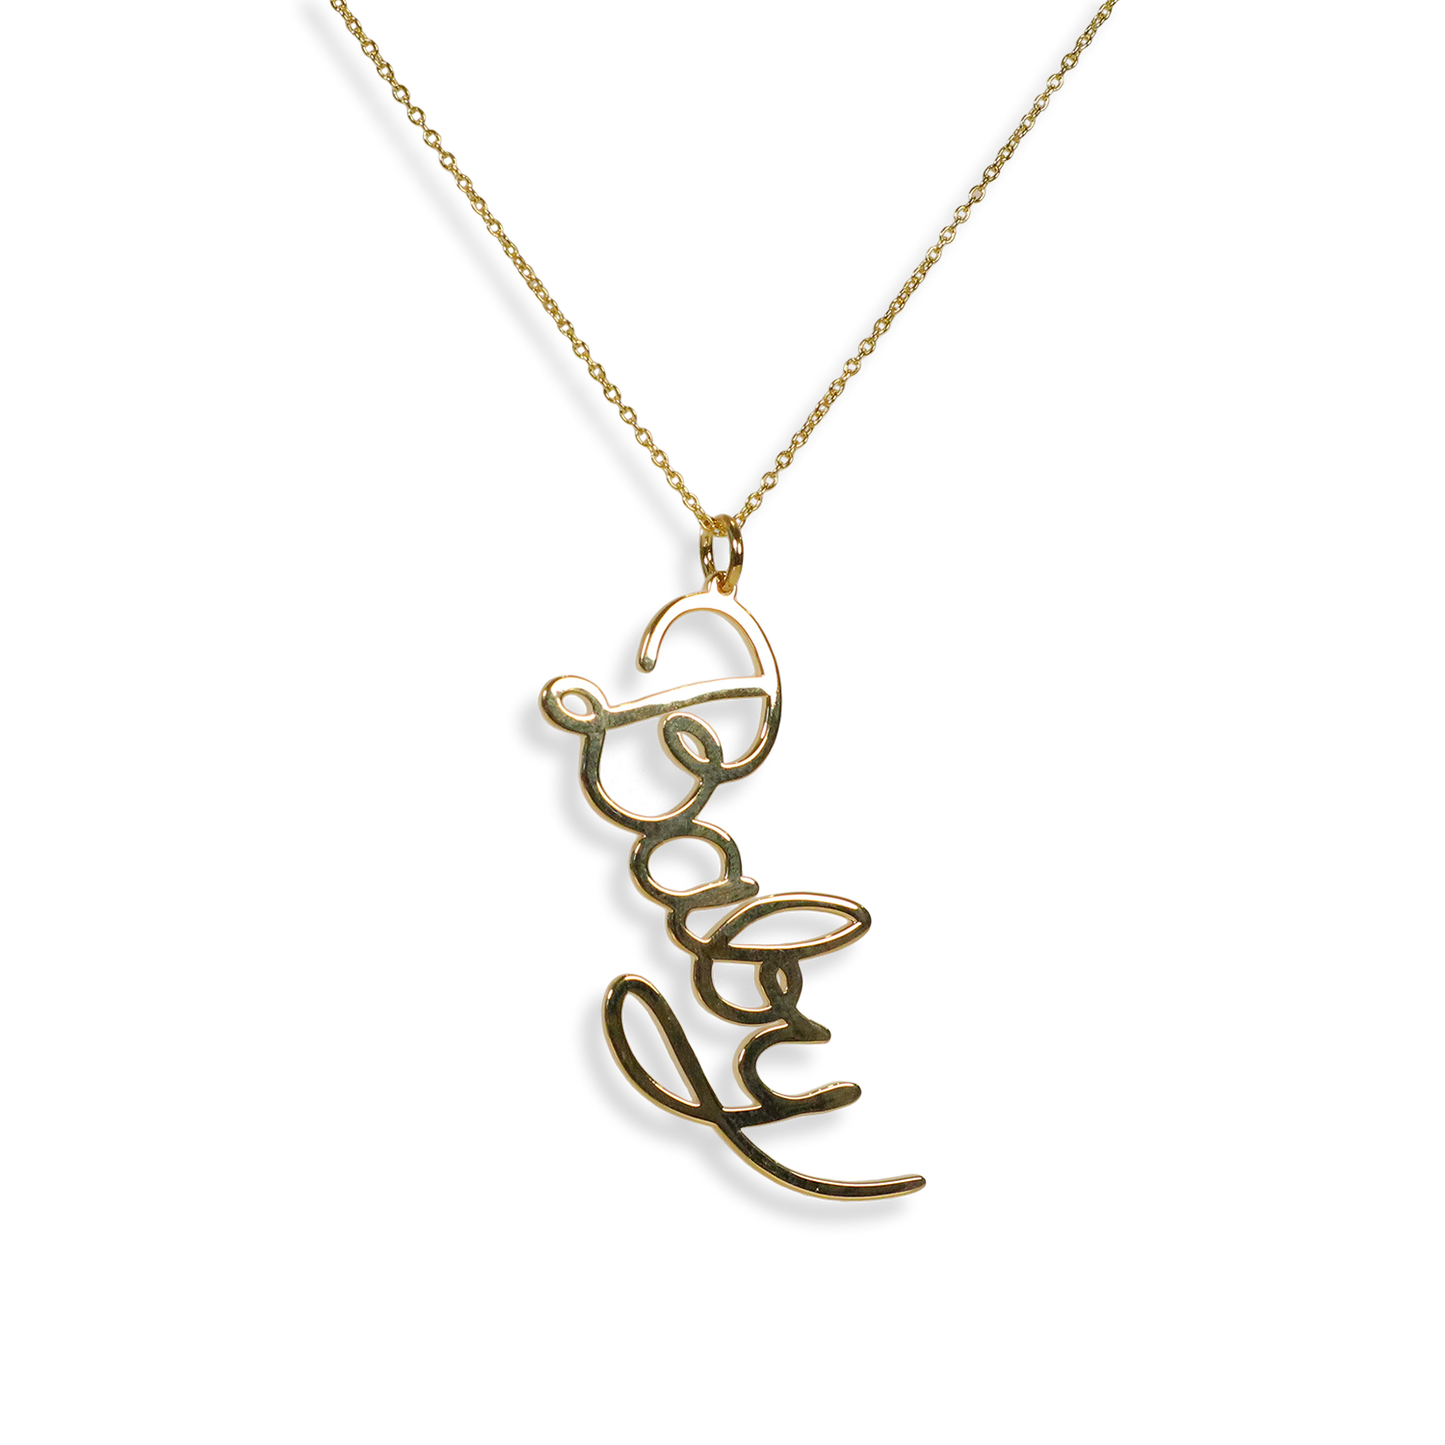 Baby Necklace - 18k Gold plated vermeil